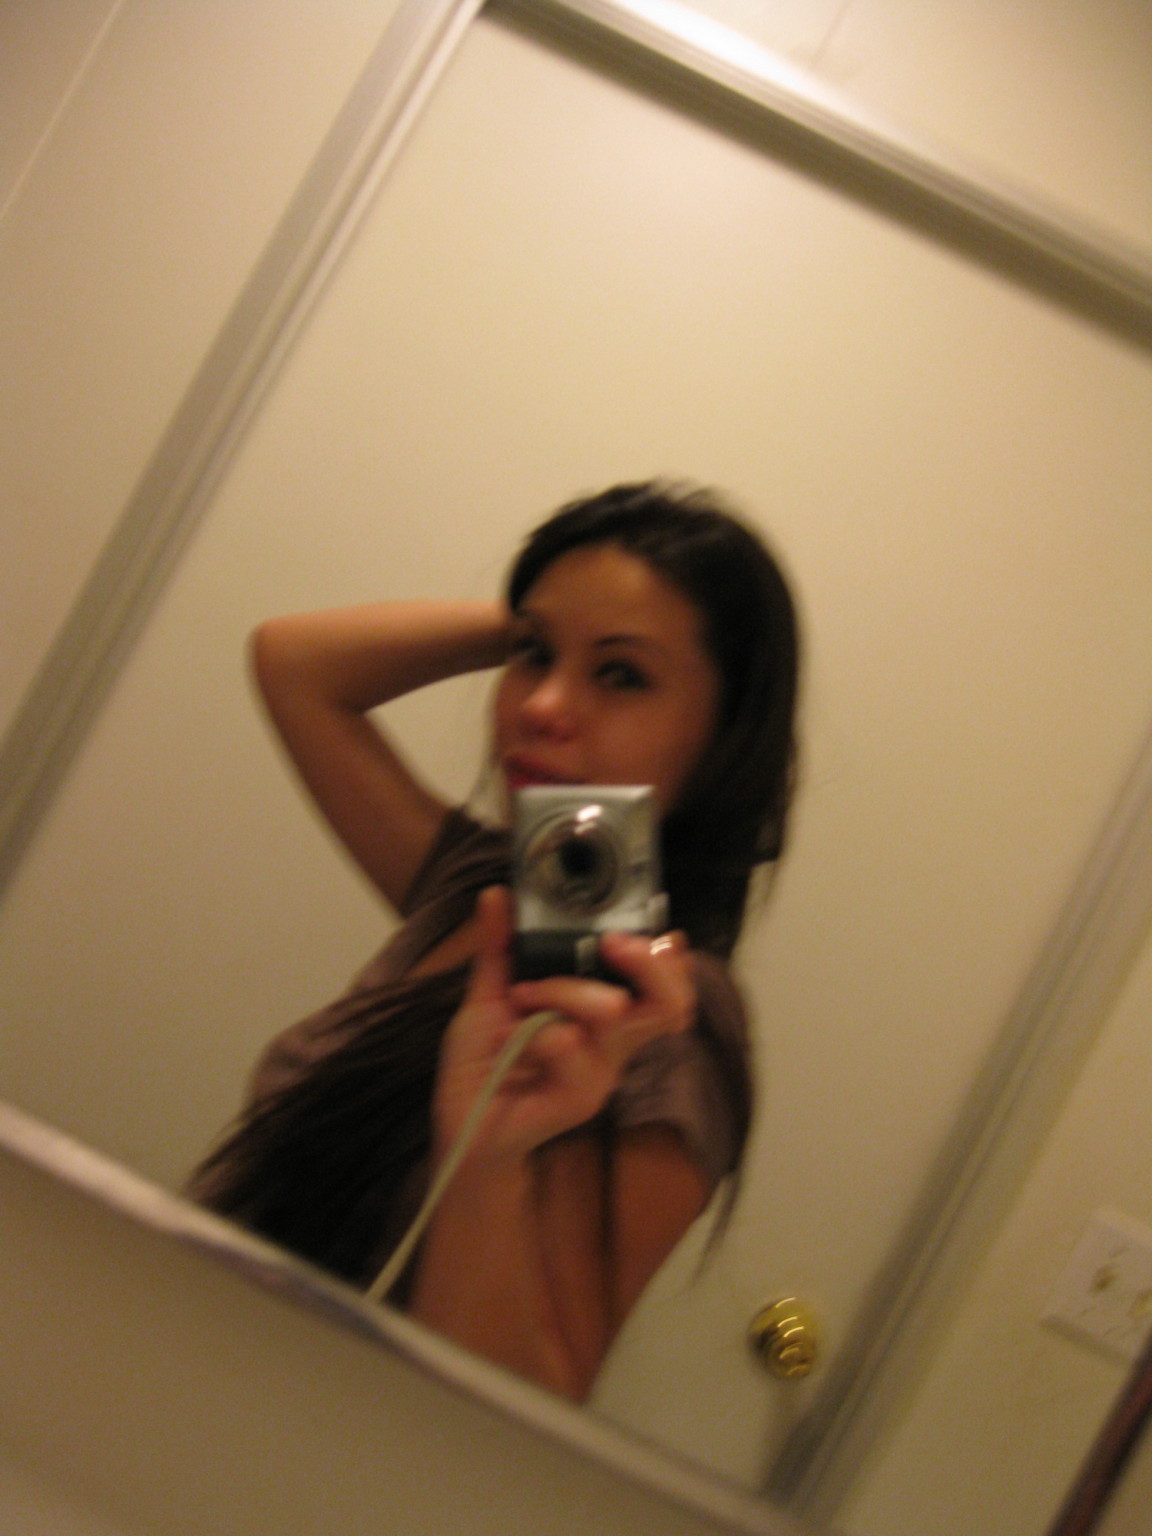 Jasmine Lee self pics sent to her boyfriend who shared them with me #68134064